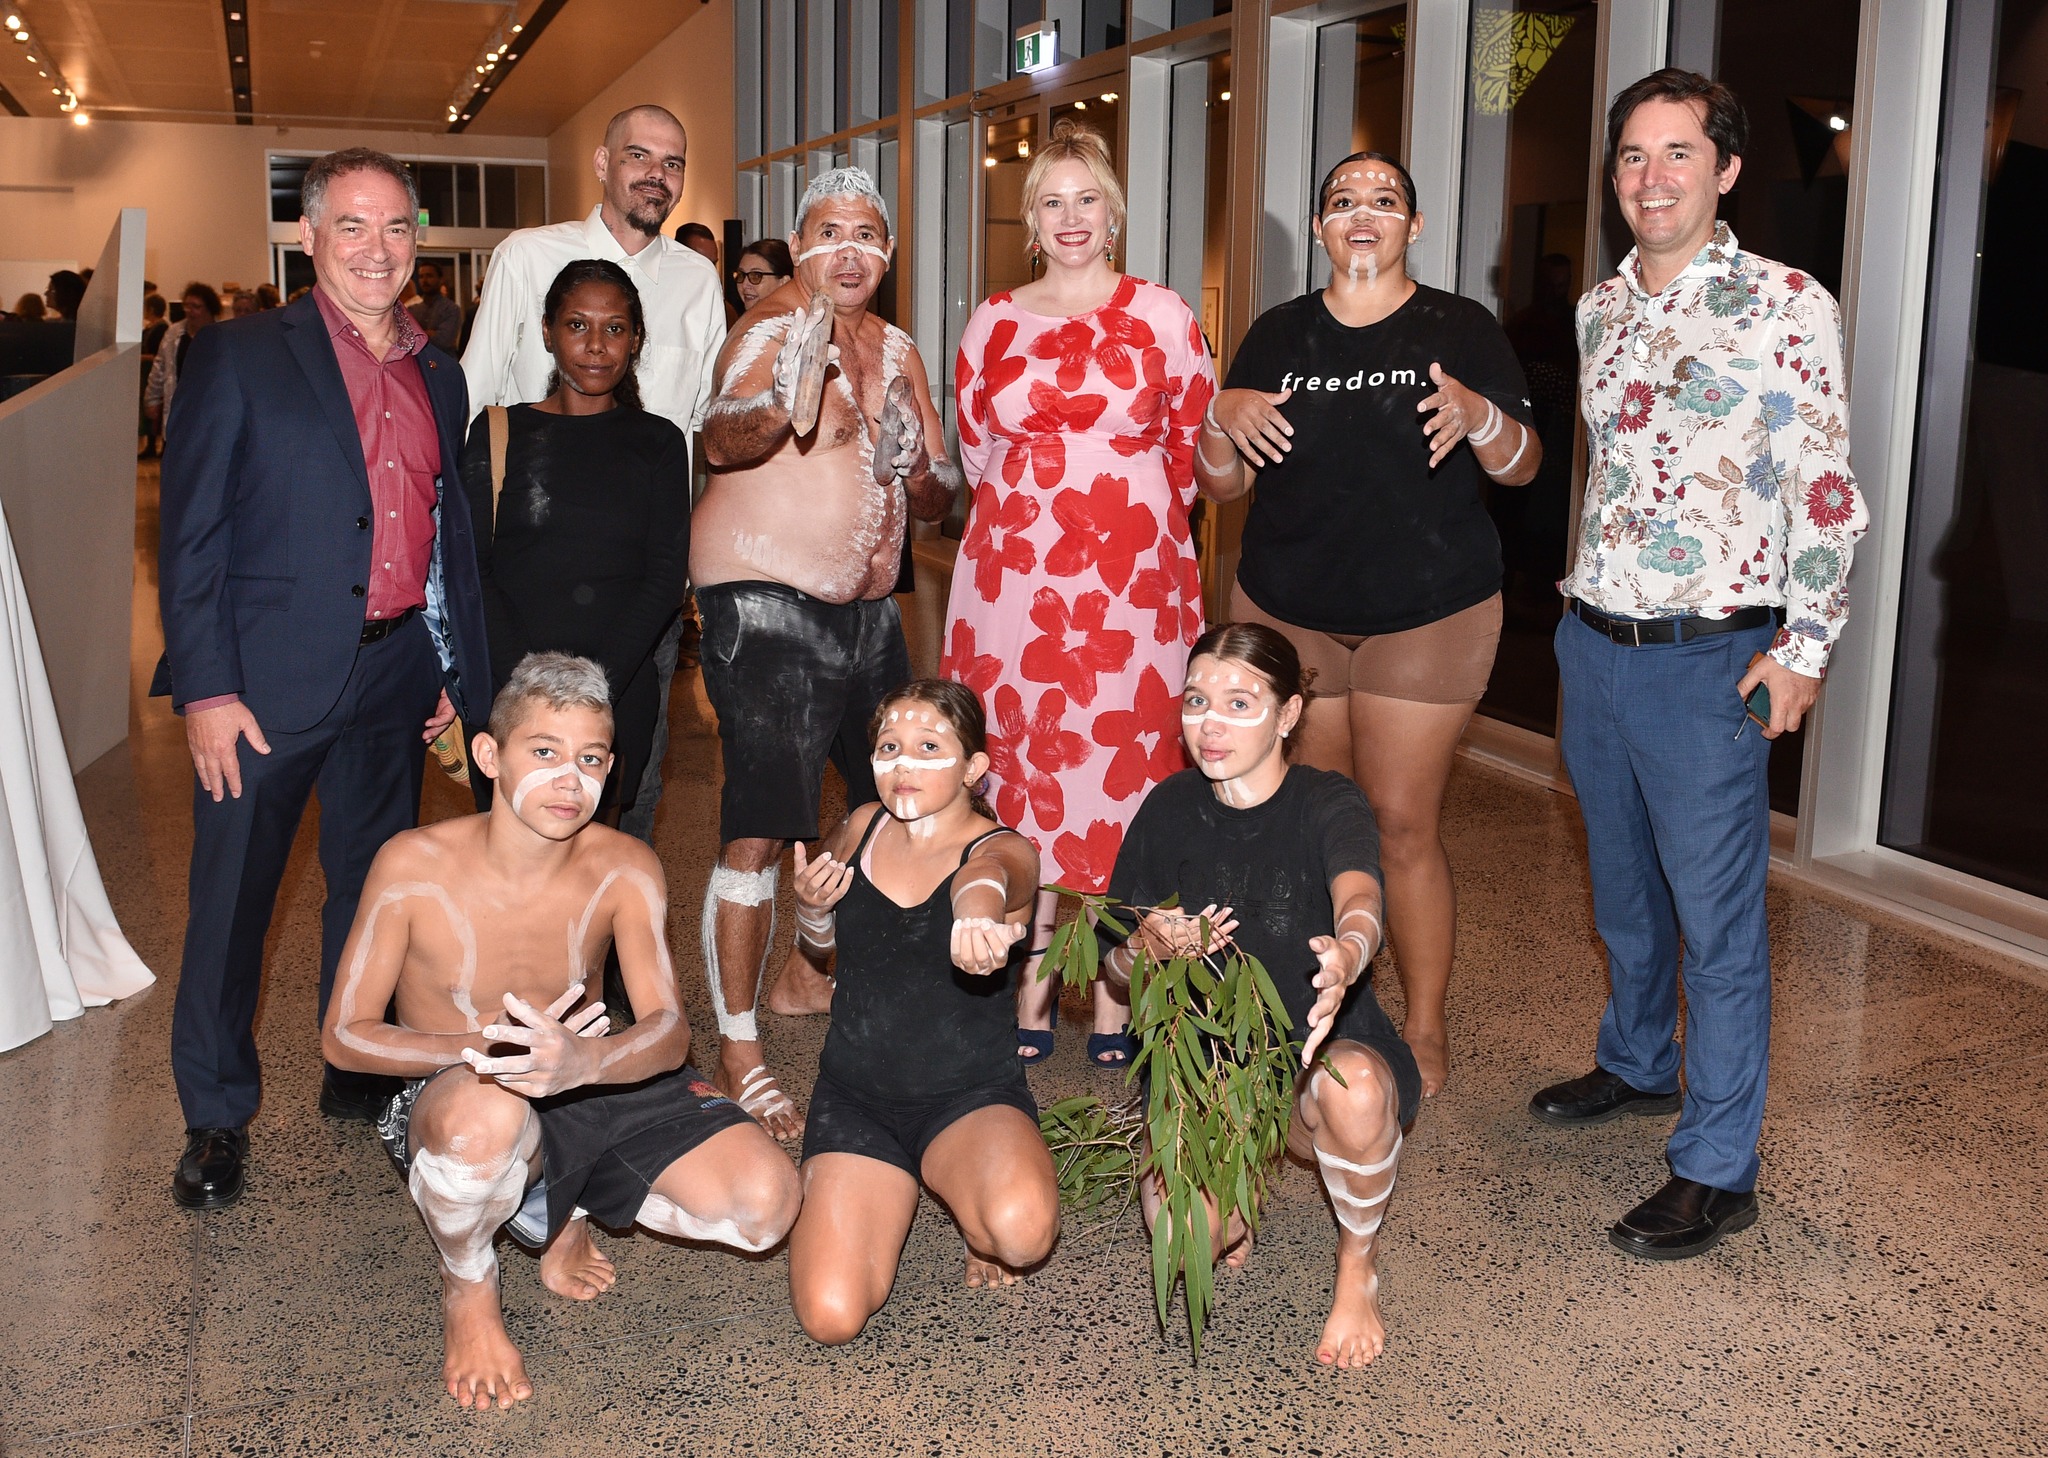 Gallery Director Ashleigh Whatling, Mayor George Seywmou, and State MP for Hervey Bay Adrian Tantari pose with memebers of the Owens Clan. Photo: Alistair Brightman